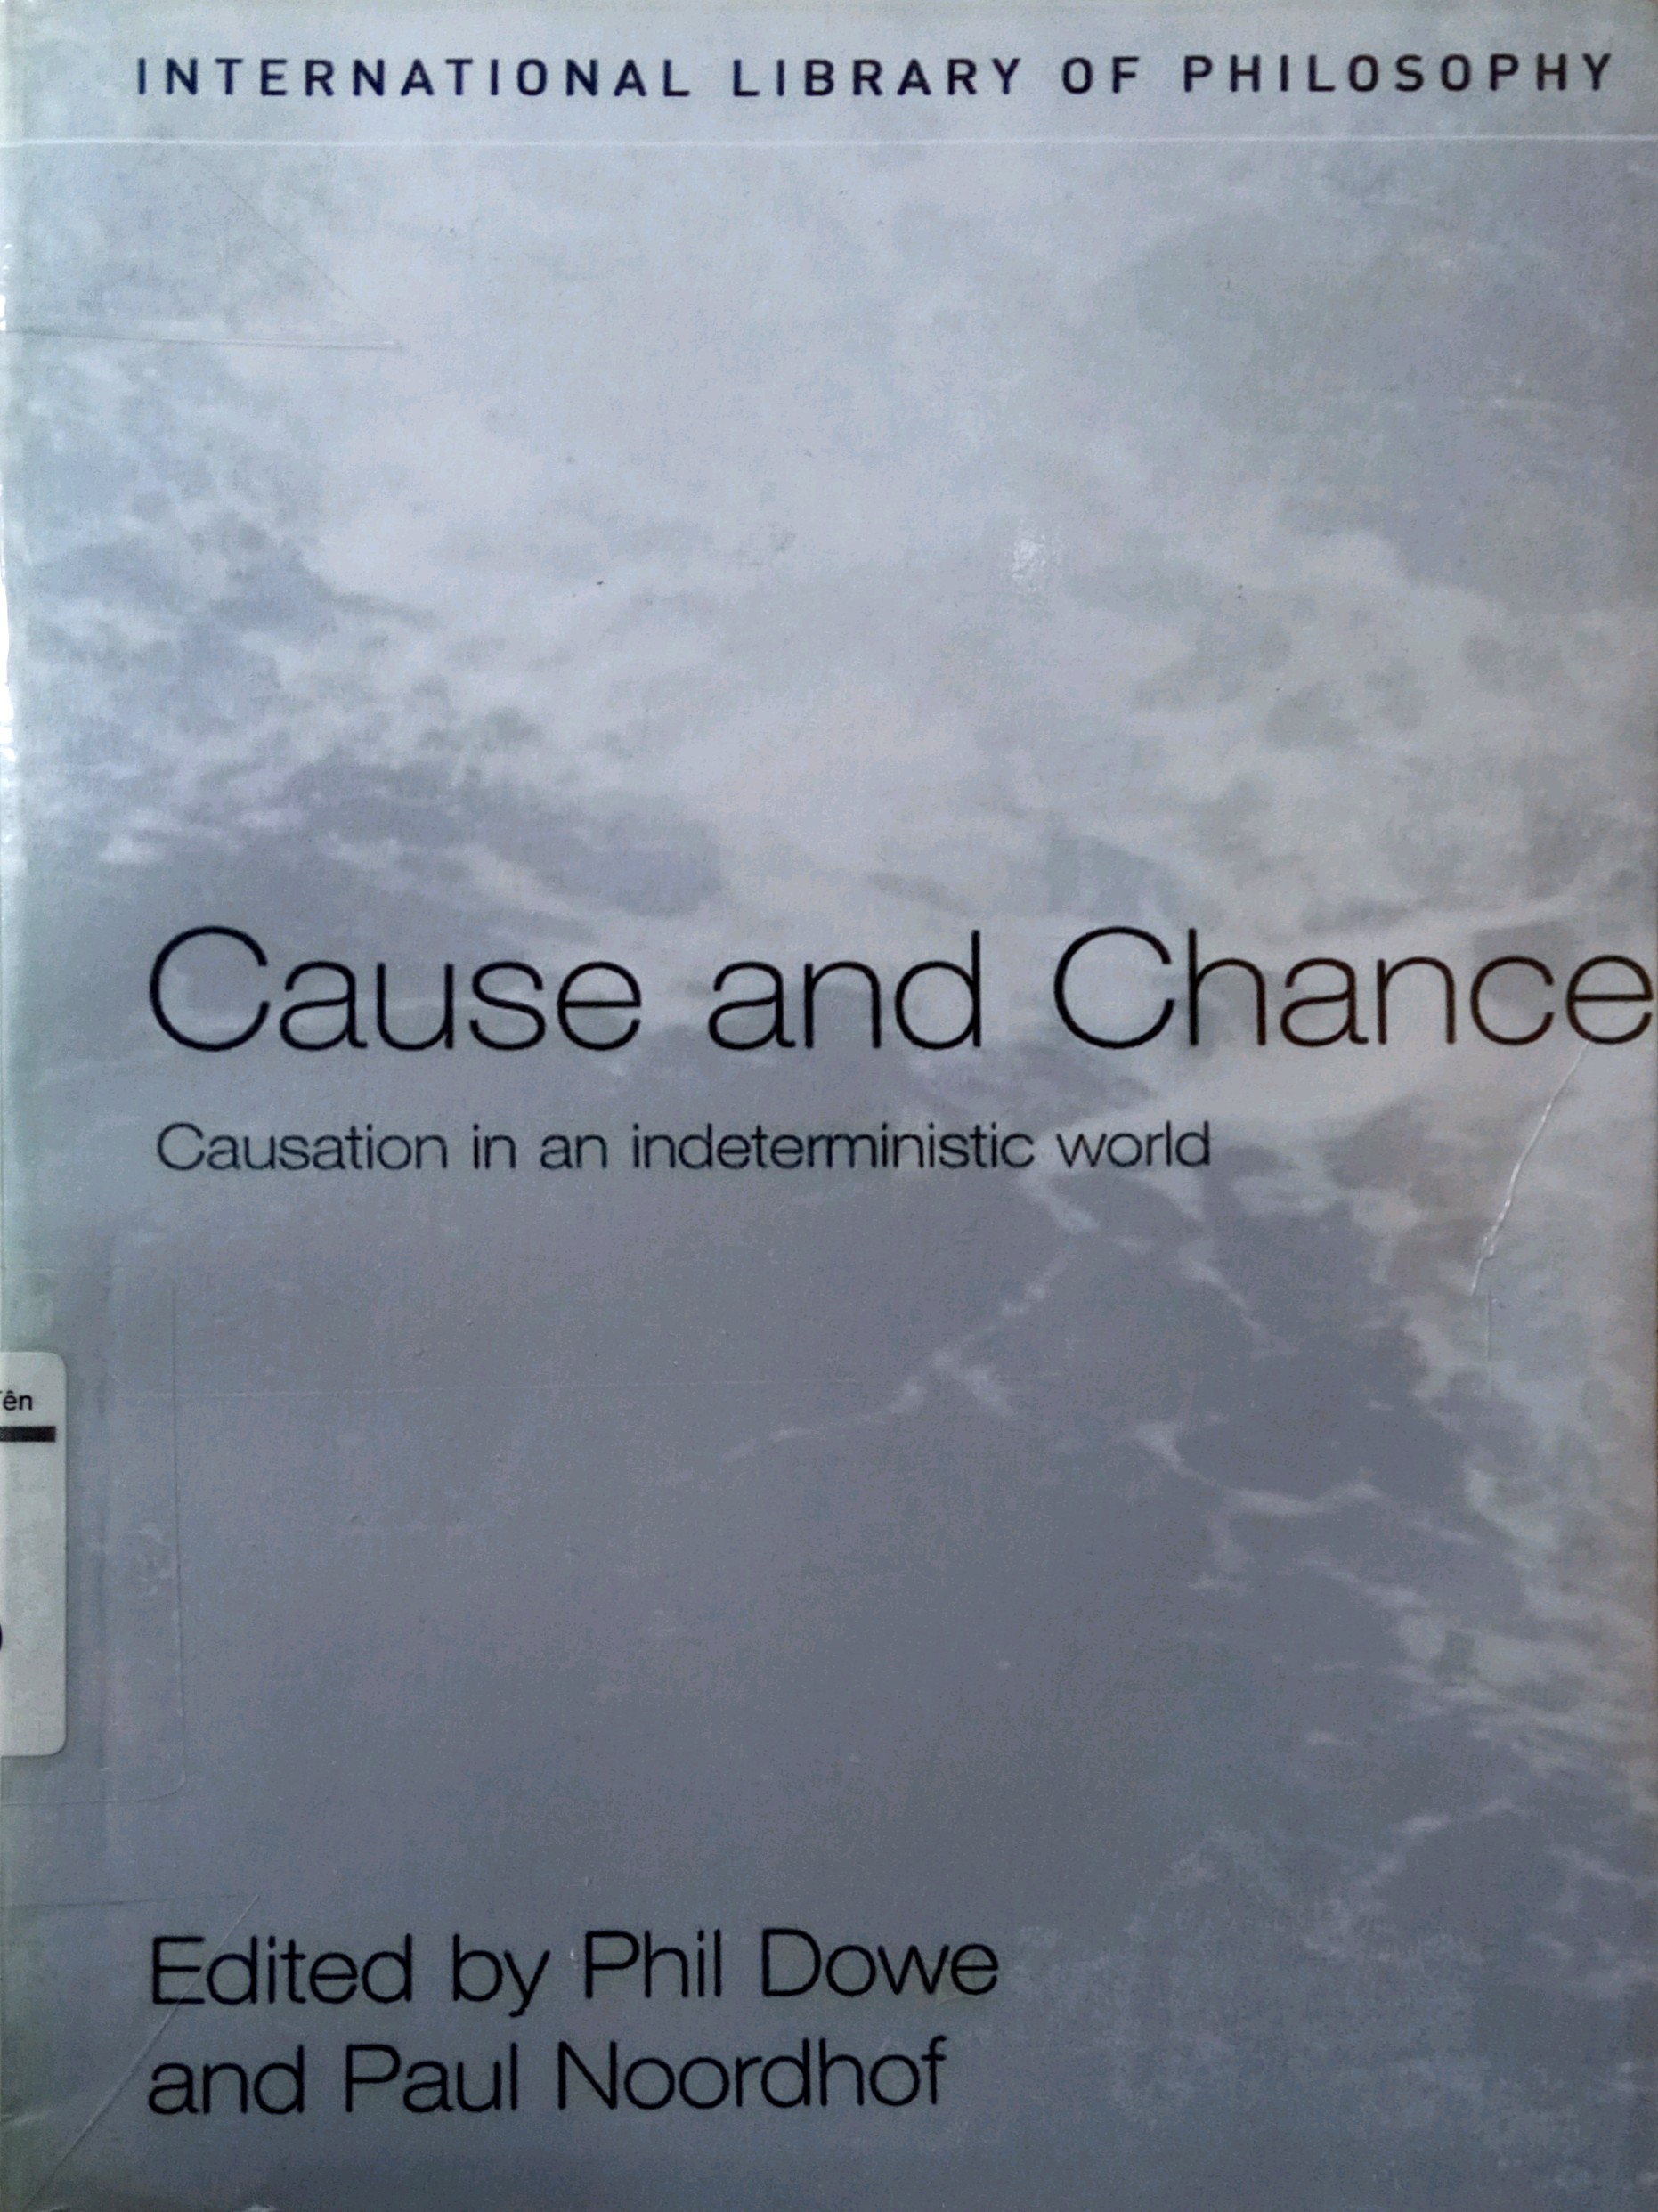 CAUSE AND CHANCE